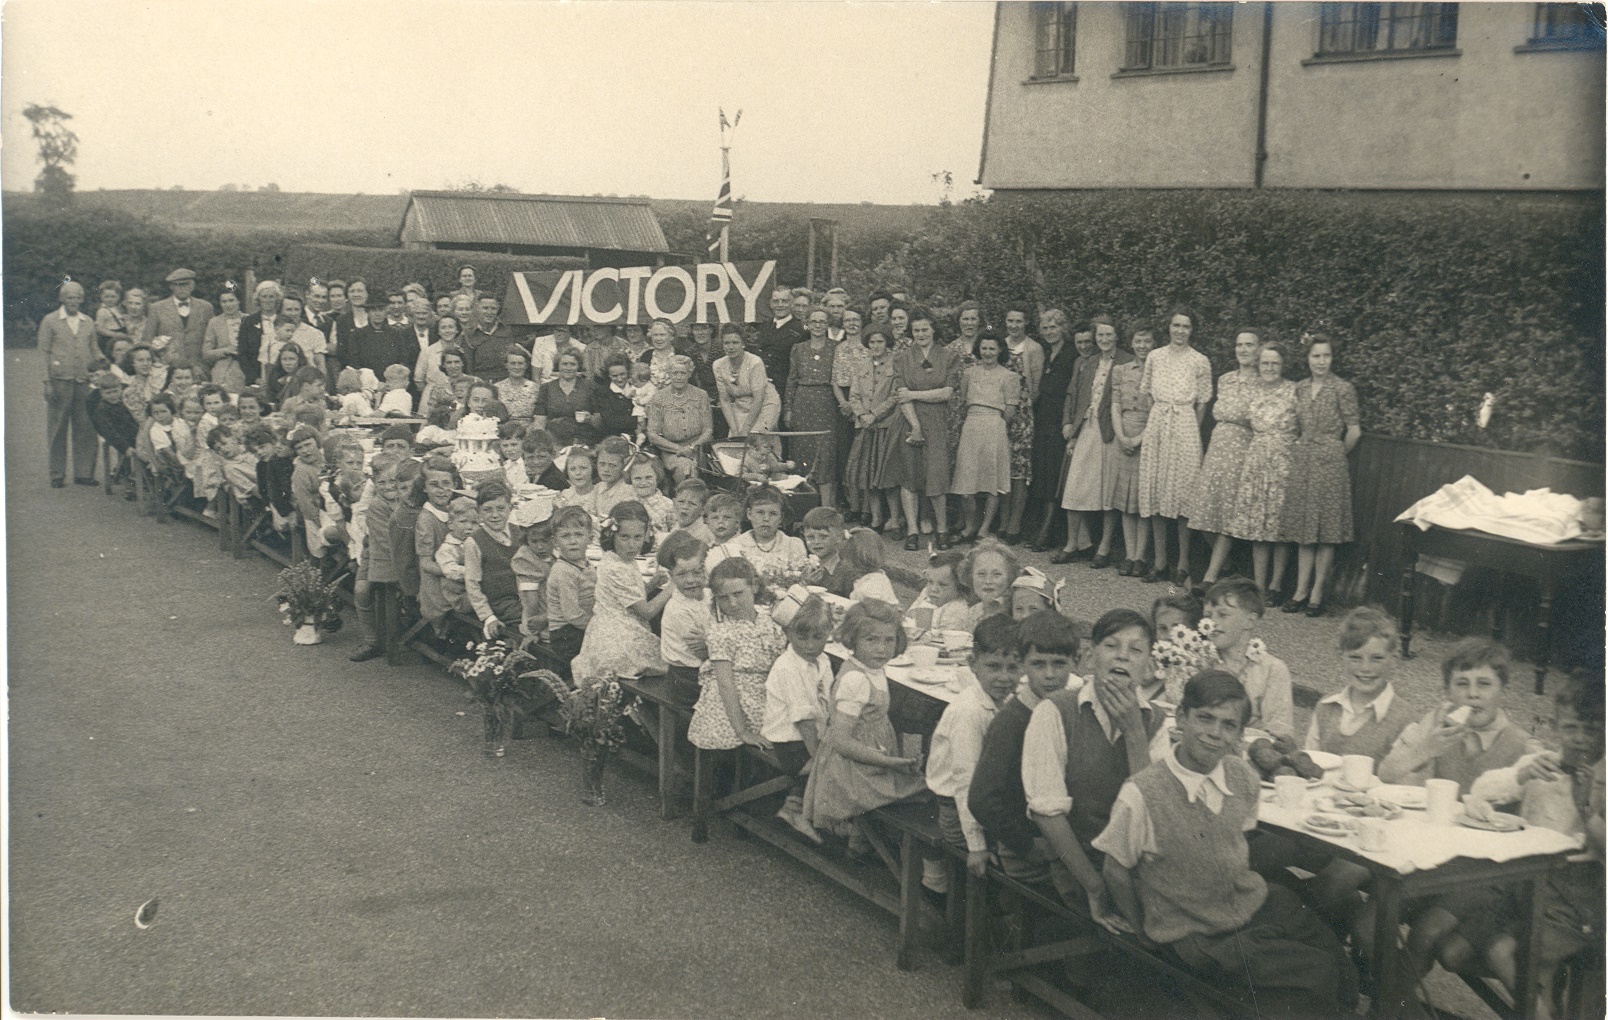 Victory celebrations in Florence Road, Walton, showing a long table with children sitting at it and adults in the background holding a 'VICTORY' banner.